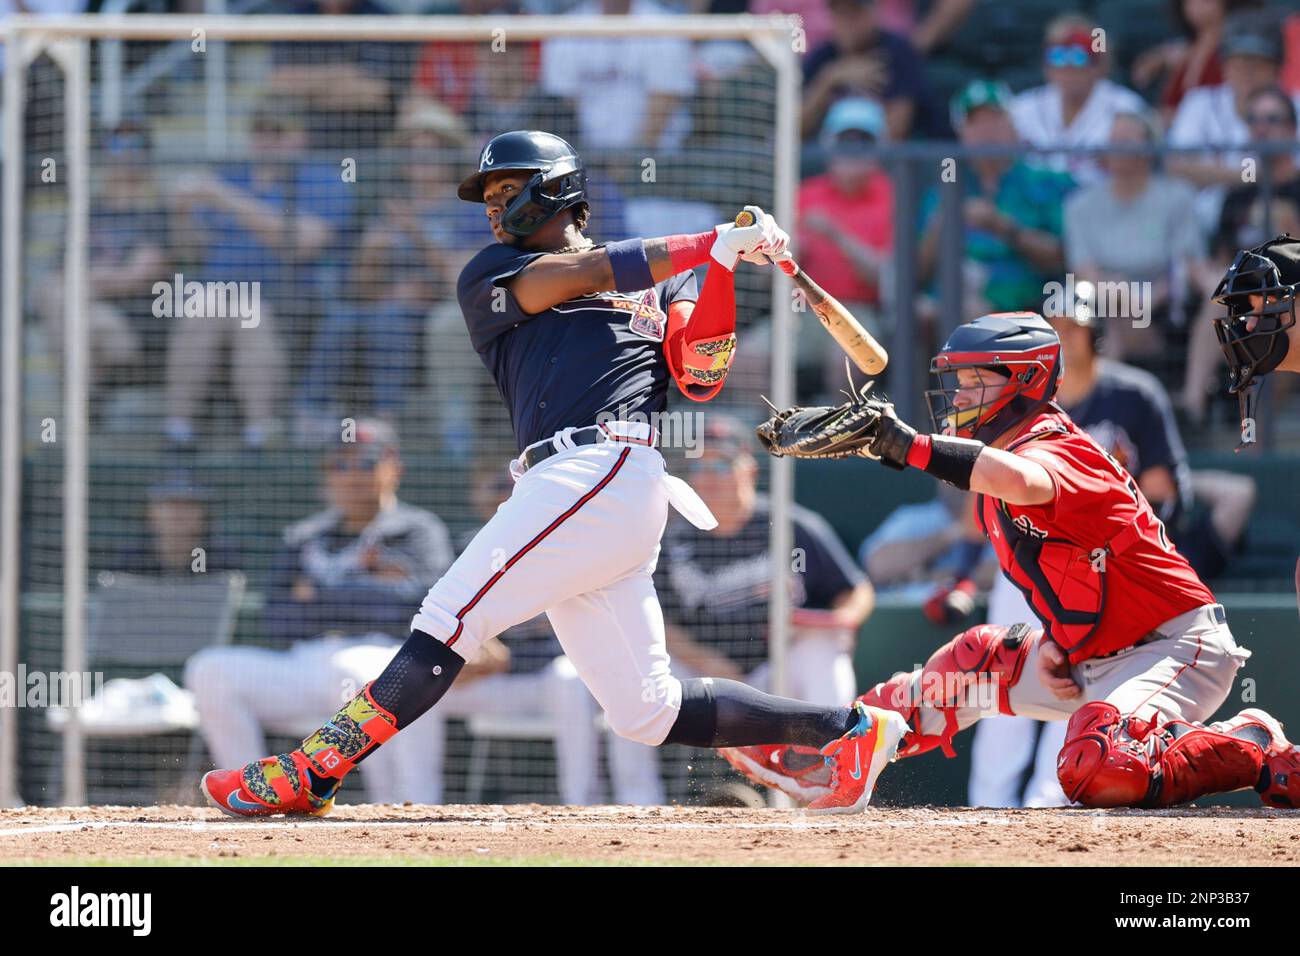 North Port FL USA: Atlanta Braves right fielder Ronald Acuna Jr. (13) hits a single to left field during an MLB spring training game against the Bosto Stock Photo